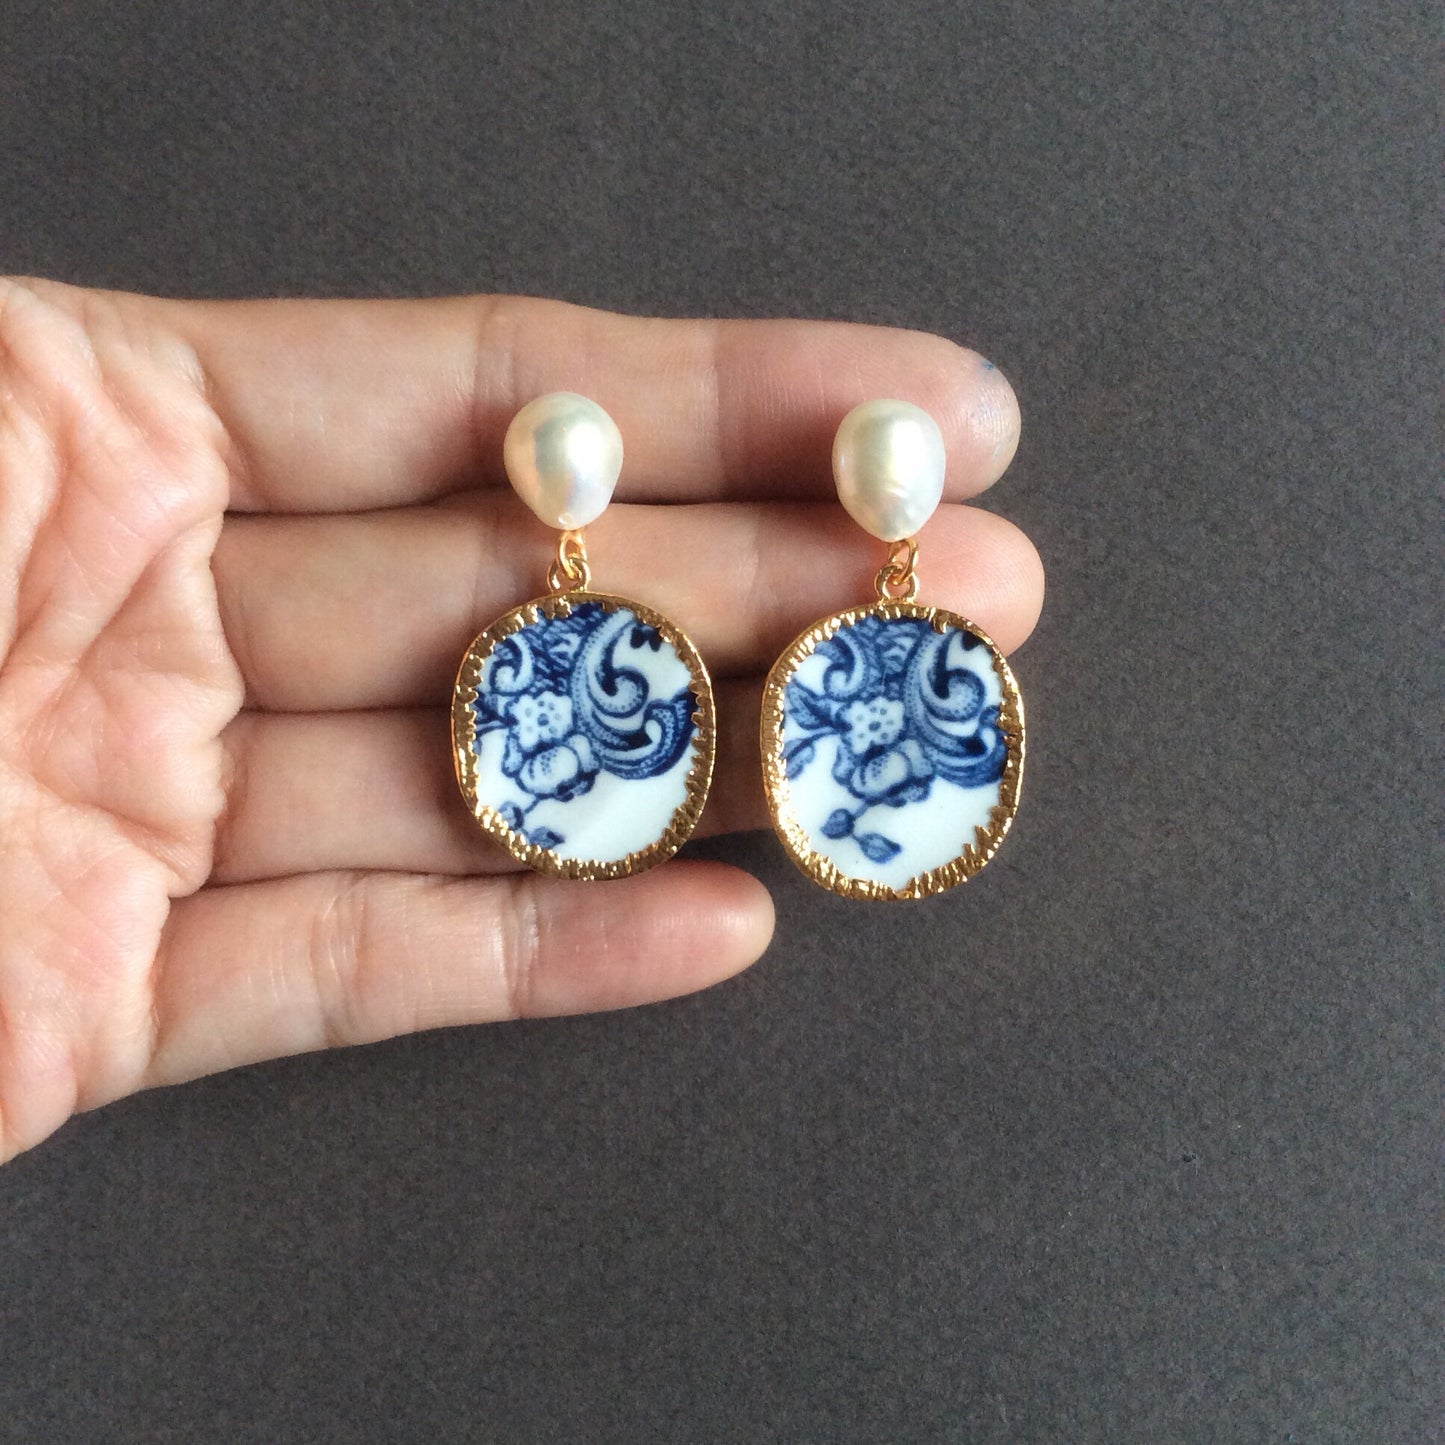 Blue and white chinoiserie porcelain earrings with freshwater pearl studs